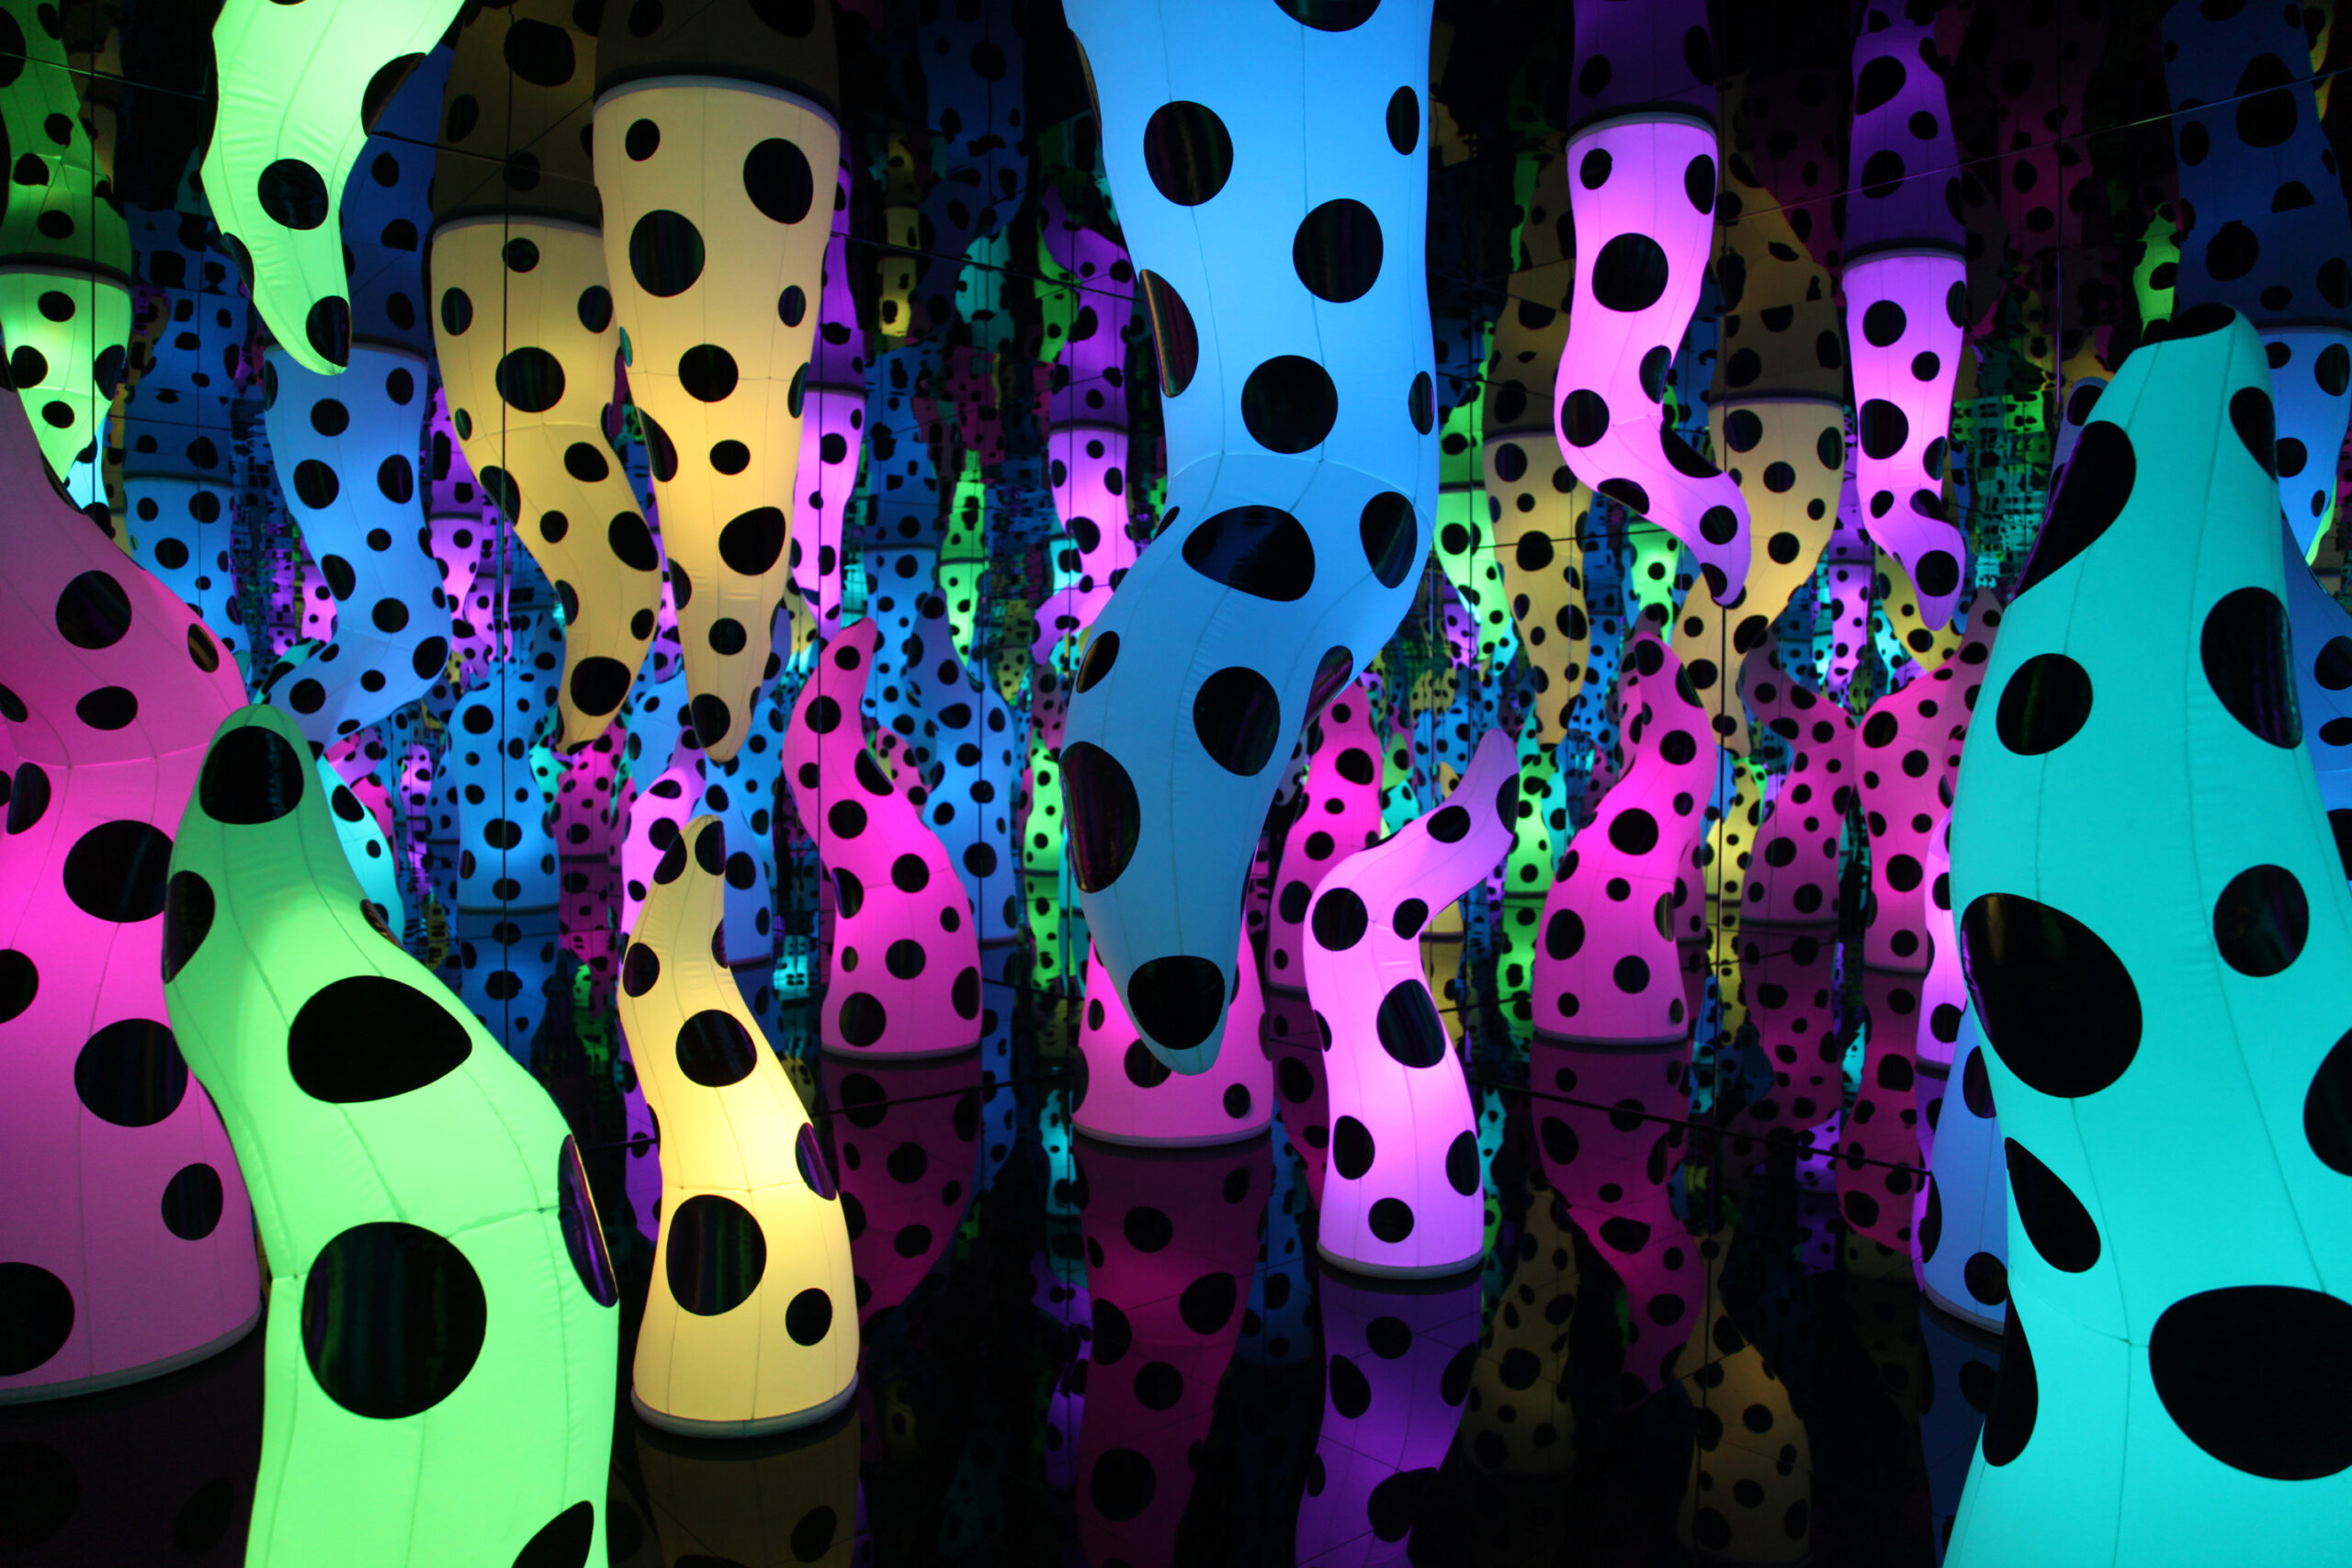 Entering the Psychedelic World of Yayoi Kusama in Her Latest Exhibition